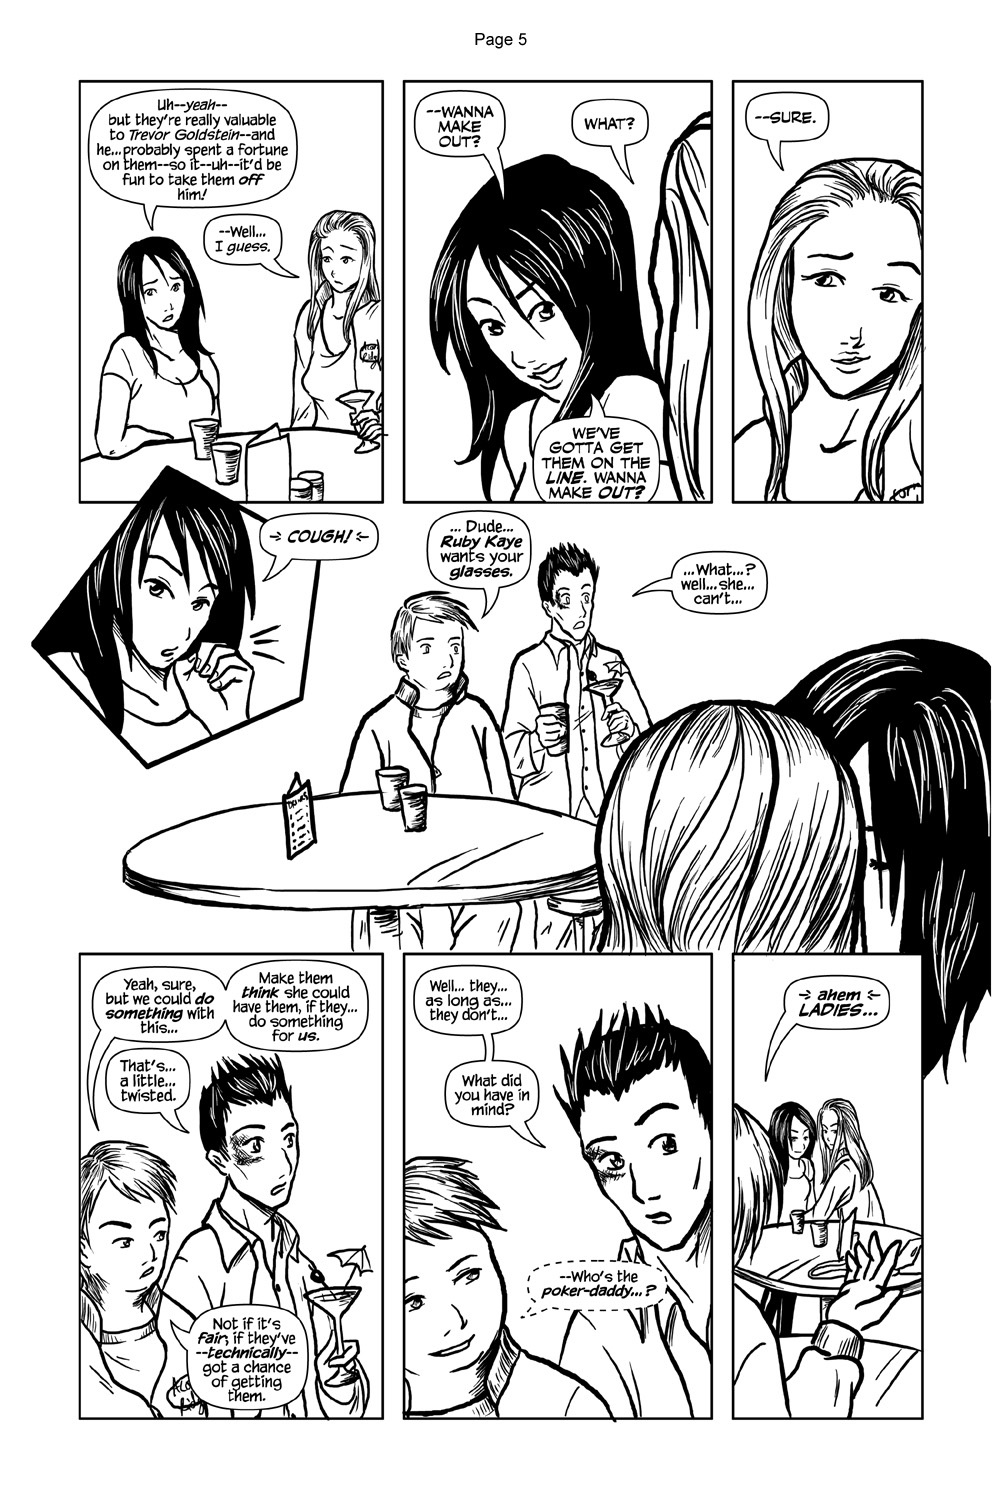 Geek-Girl #0 Preview Page 5